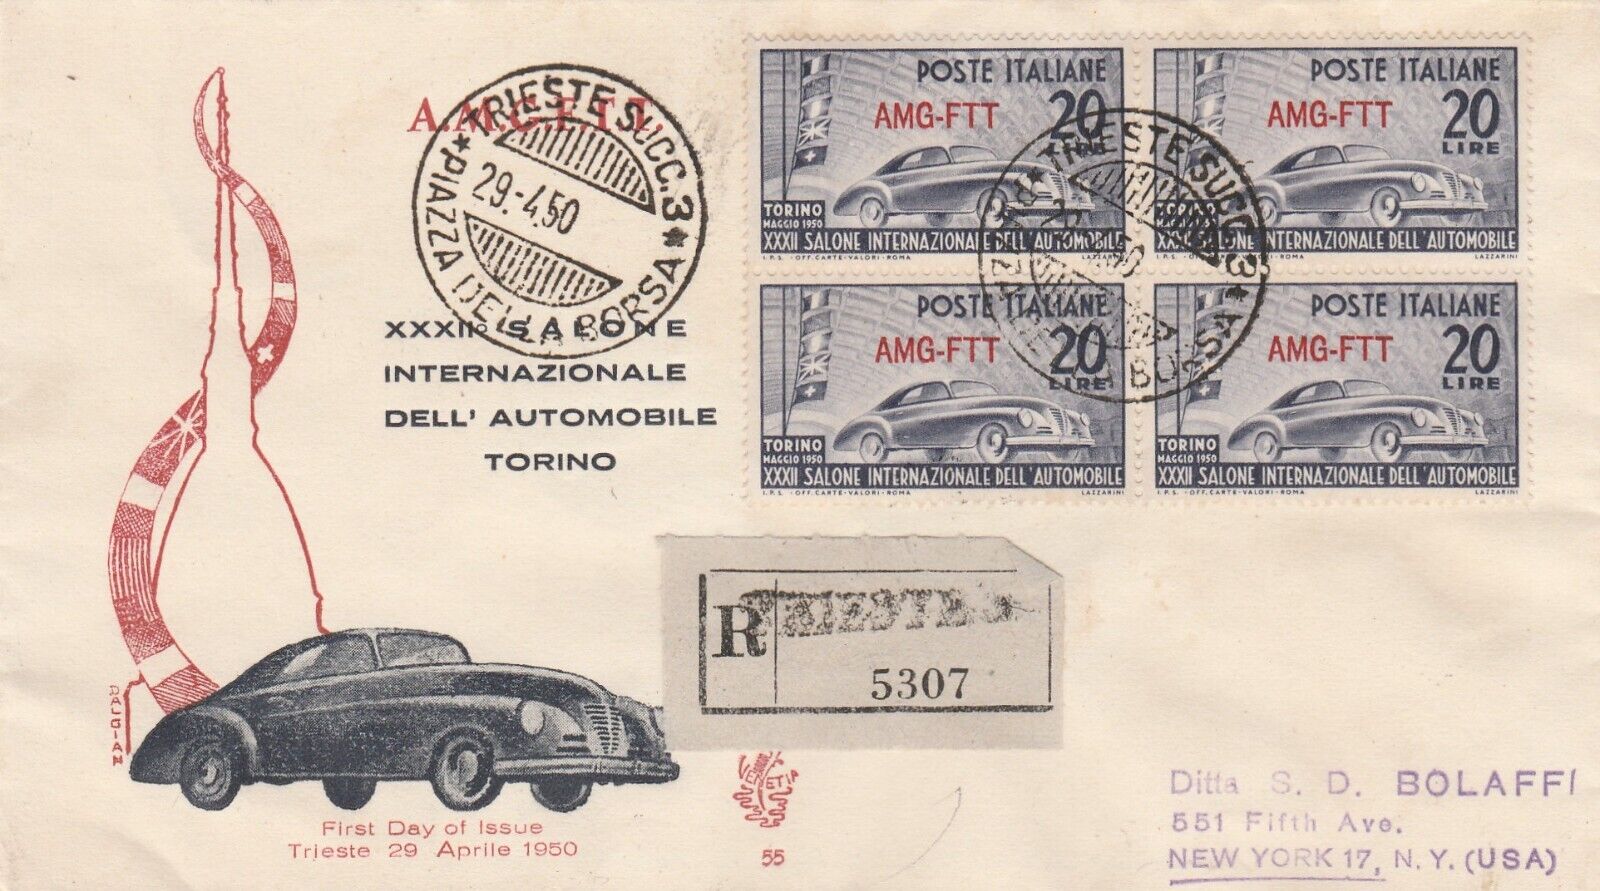 Trieste AMGFTT Italy 1950 FDC Mailed Registered to USA